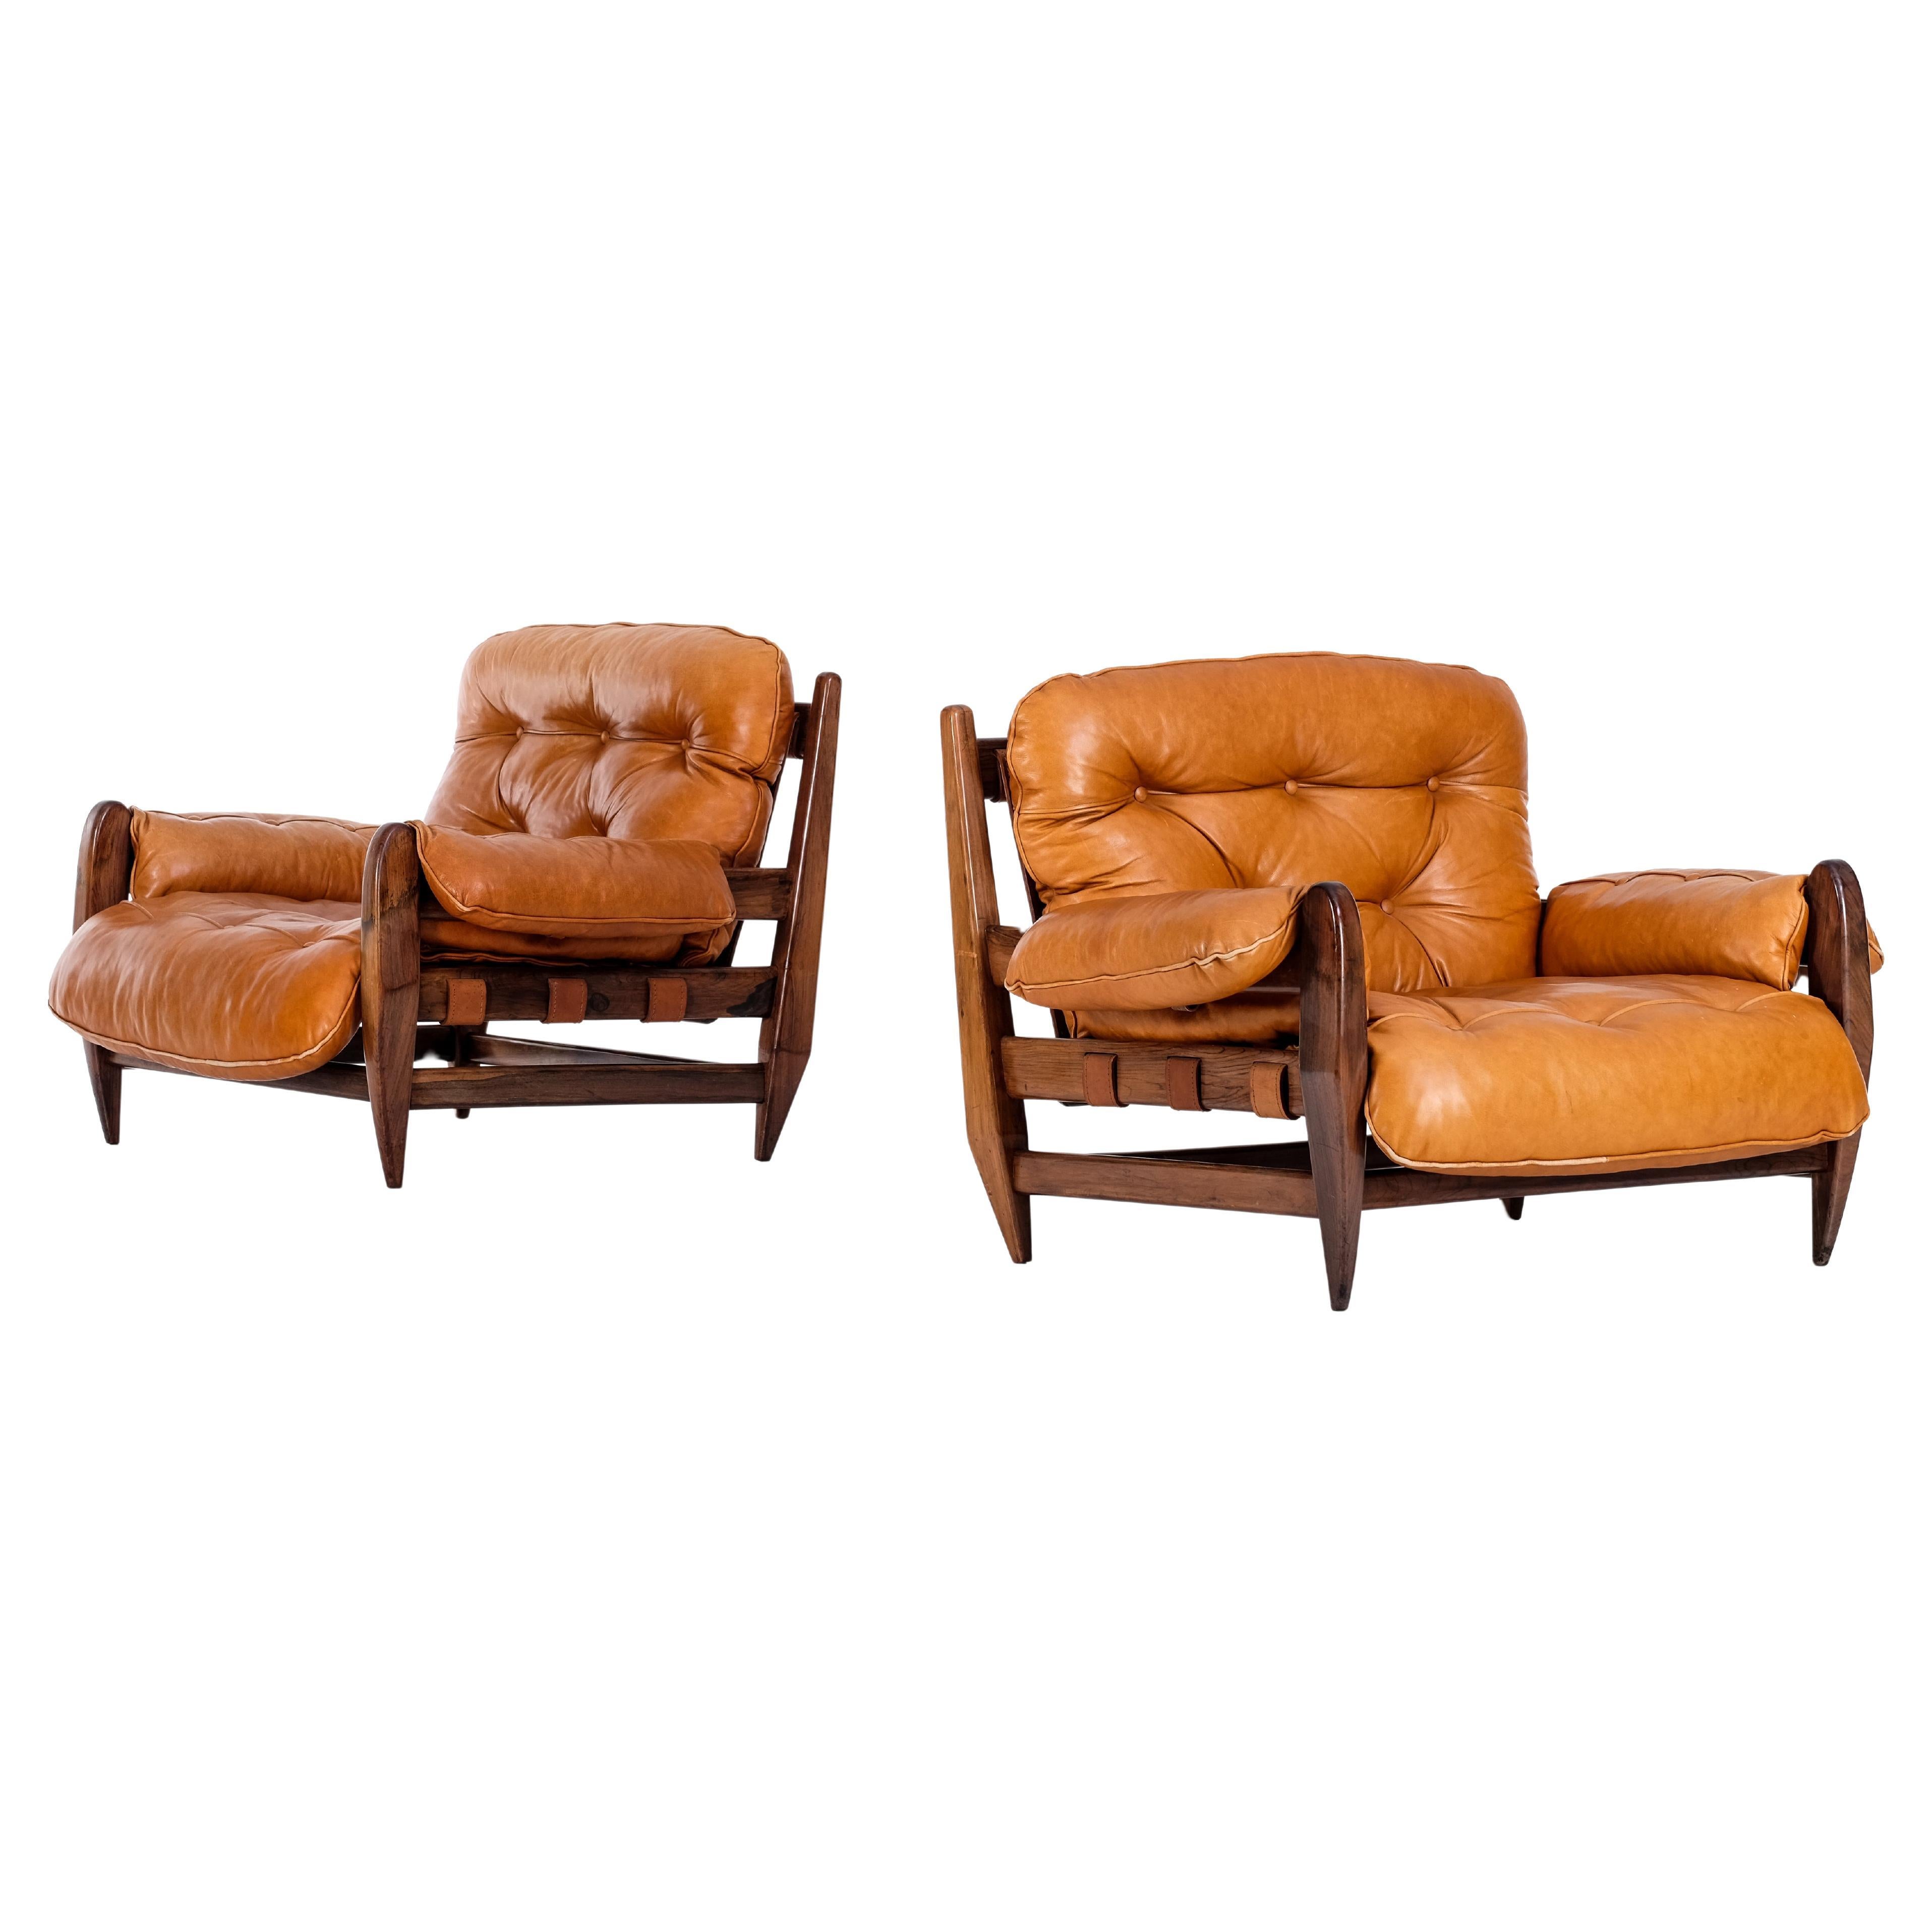 Rare pair of Jean Gillon "Rodeio" Easy Chairs, Brazil, 1960s For Sale